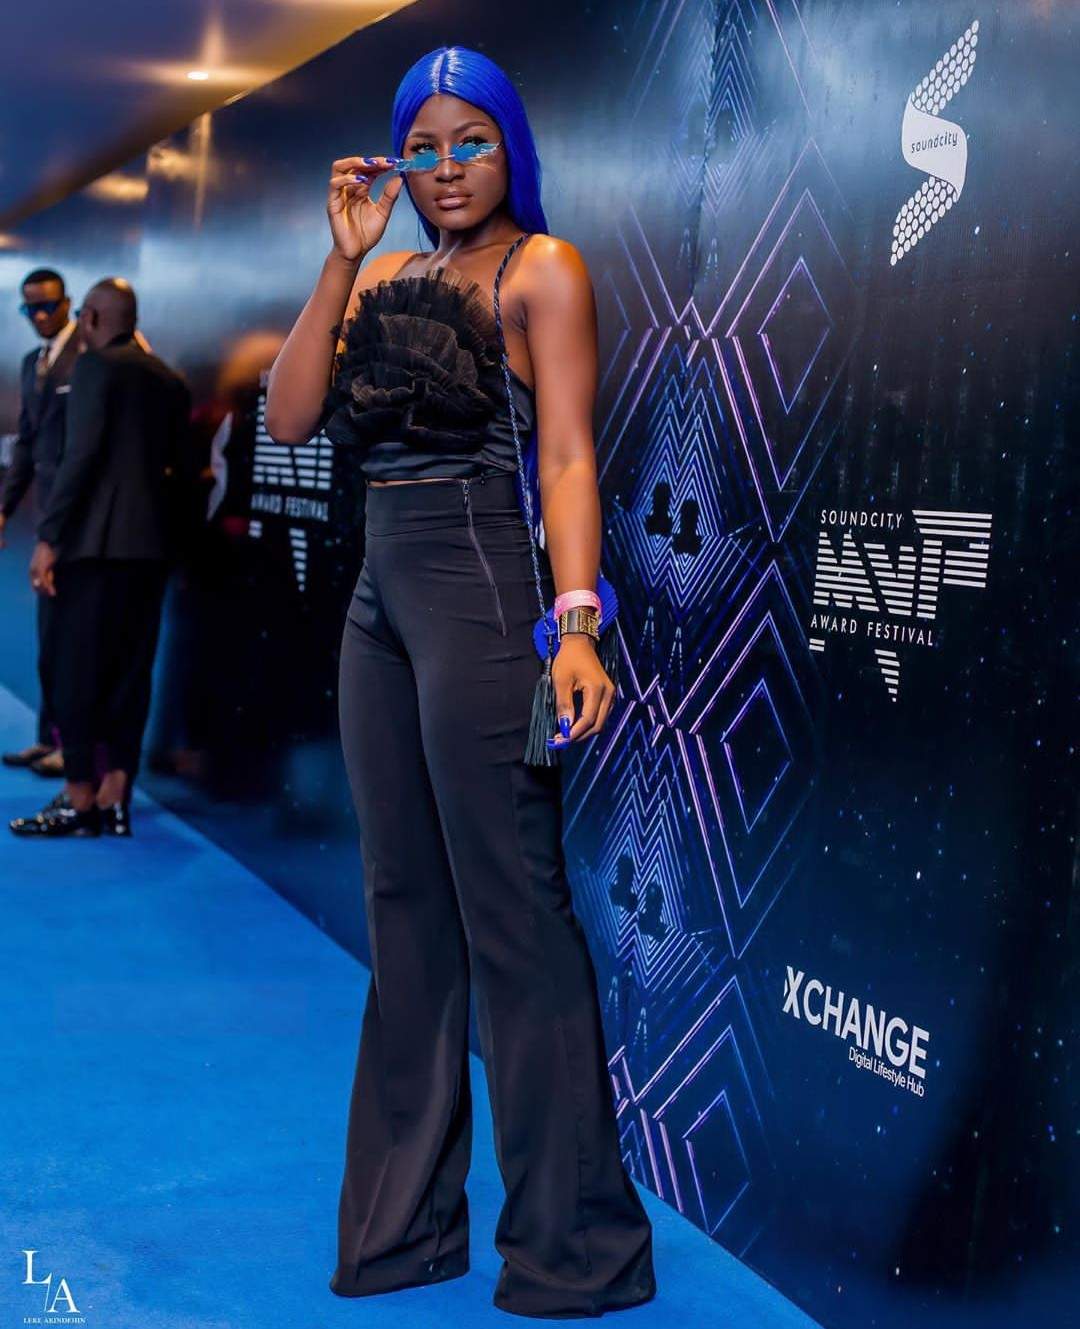 "I was six months old when I got my first global gig. I'm not your mate"- Alex Unusual